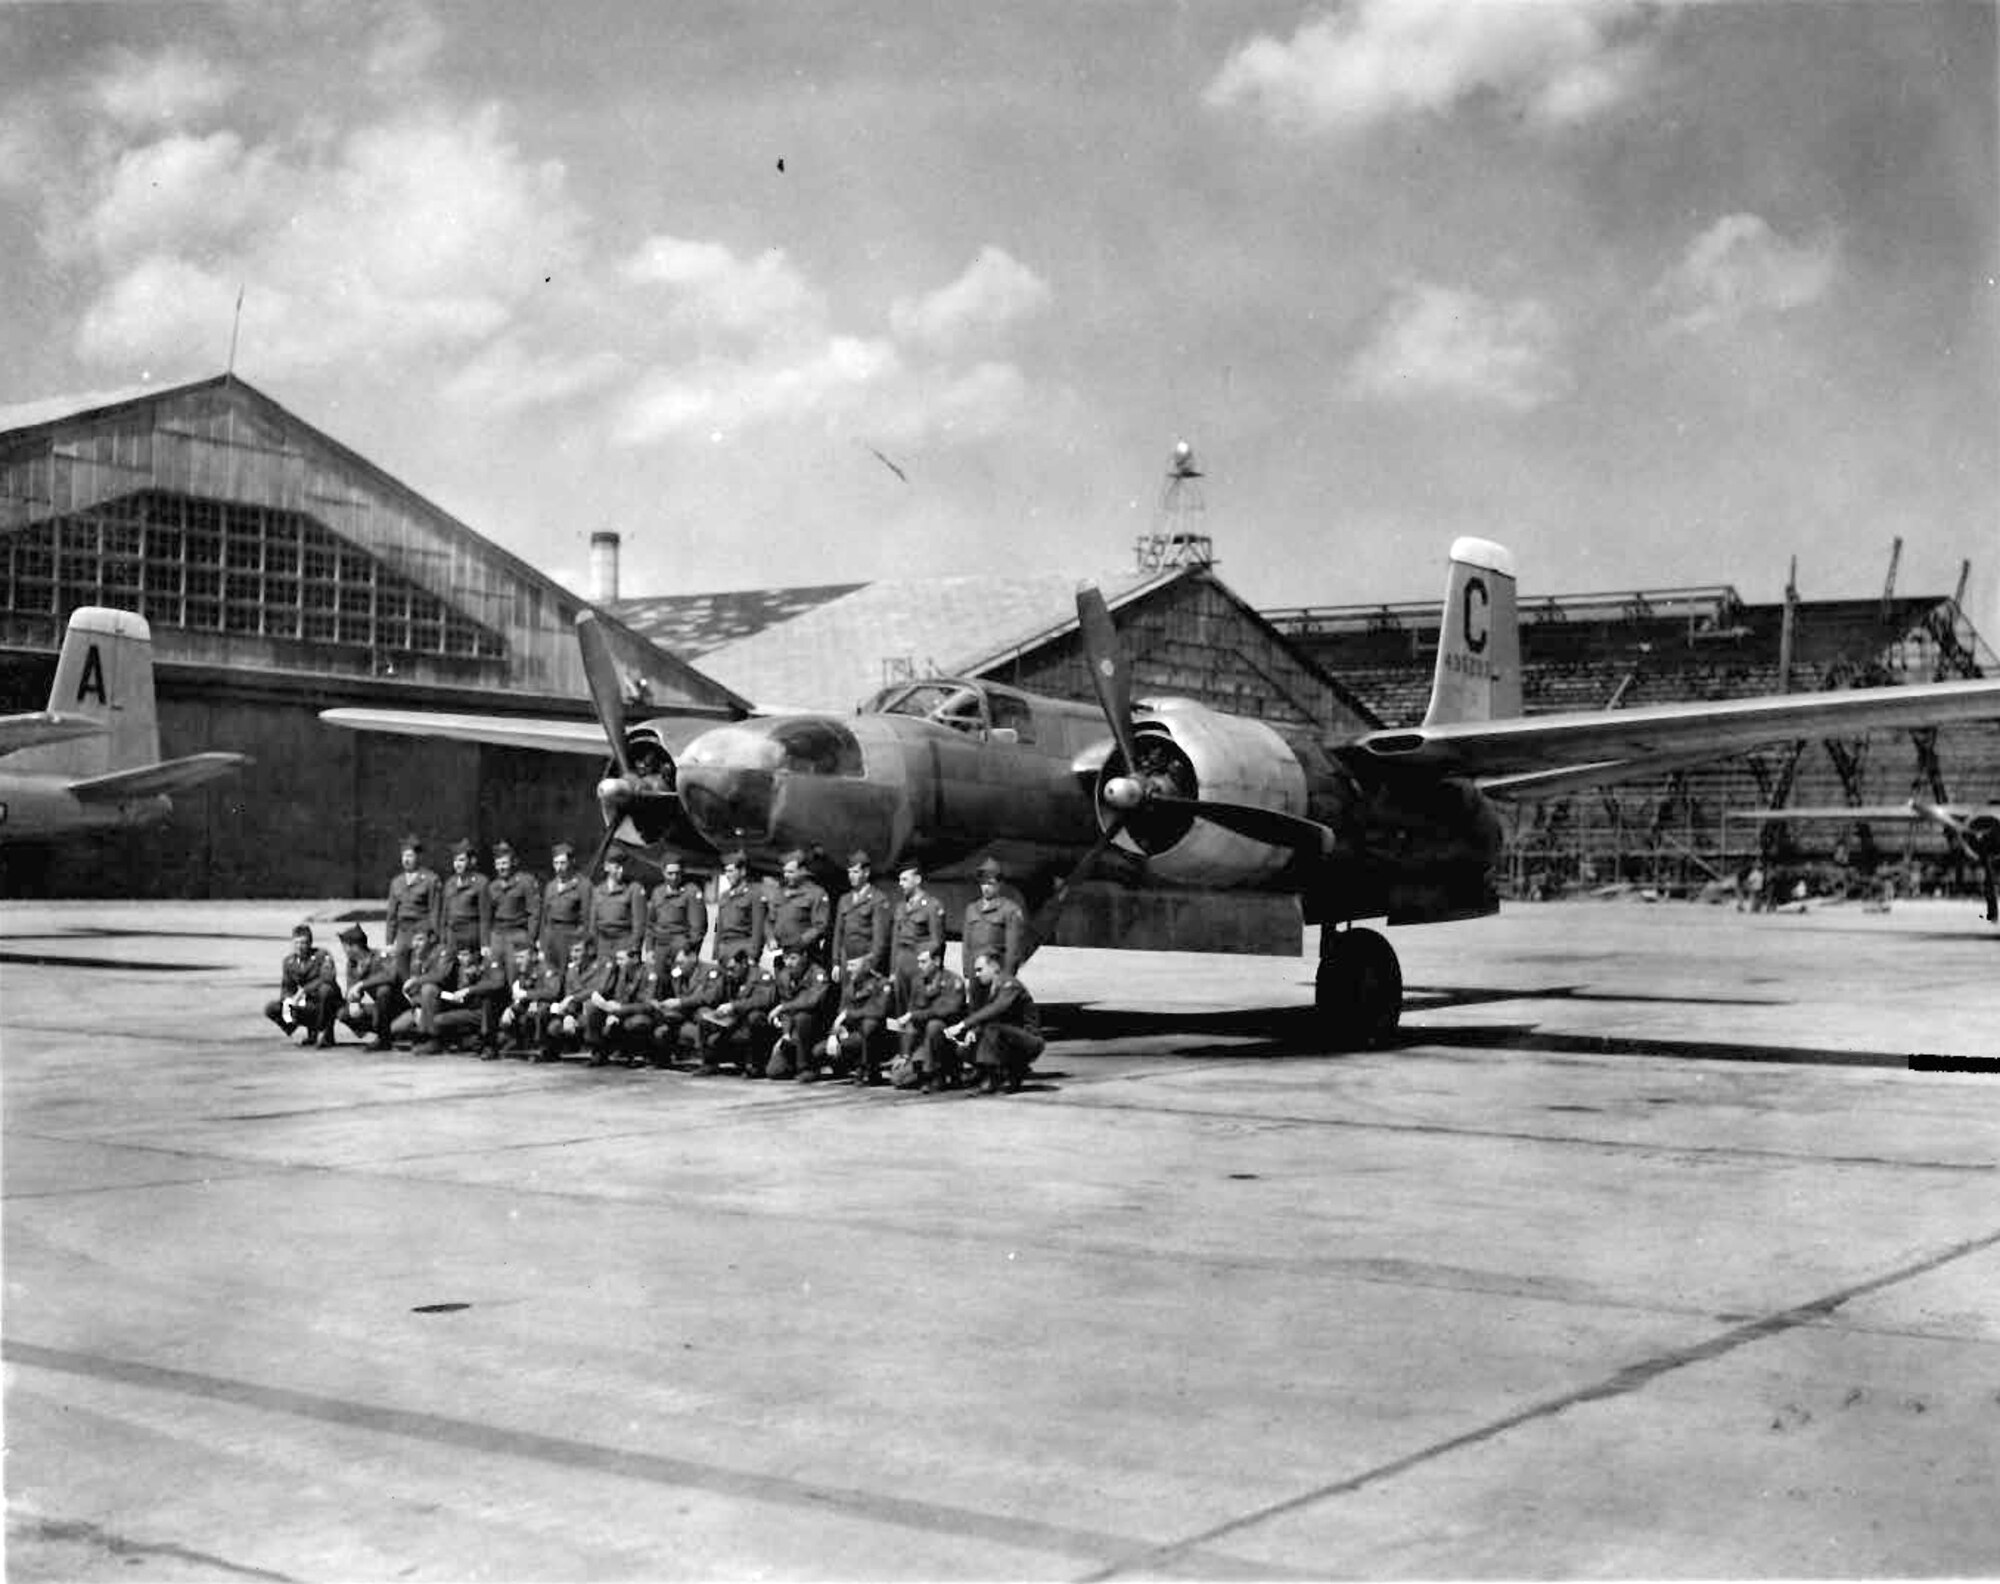 Students from Yokota Air Base's mechanics school pose in front of an A-26 Invader, March 1947. The hangar under construction in the background is still in use today.
(U.S. Air Force photo courtesy of the 374 Airlift Wing History Office)